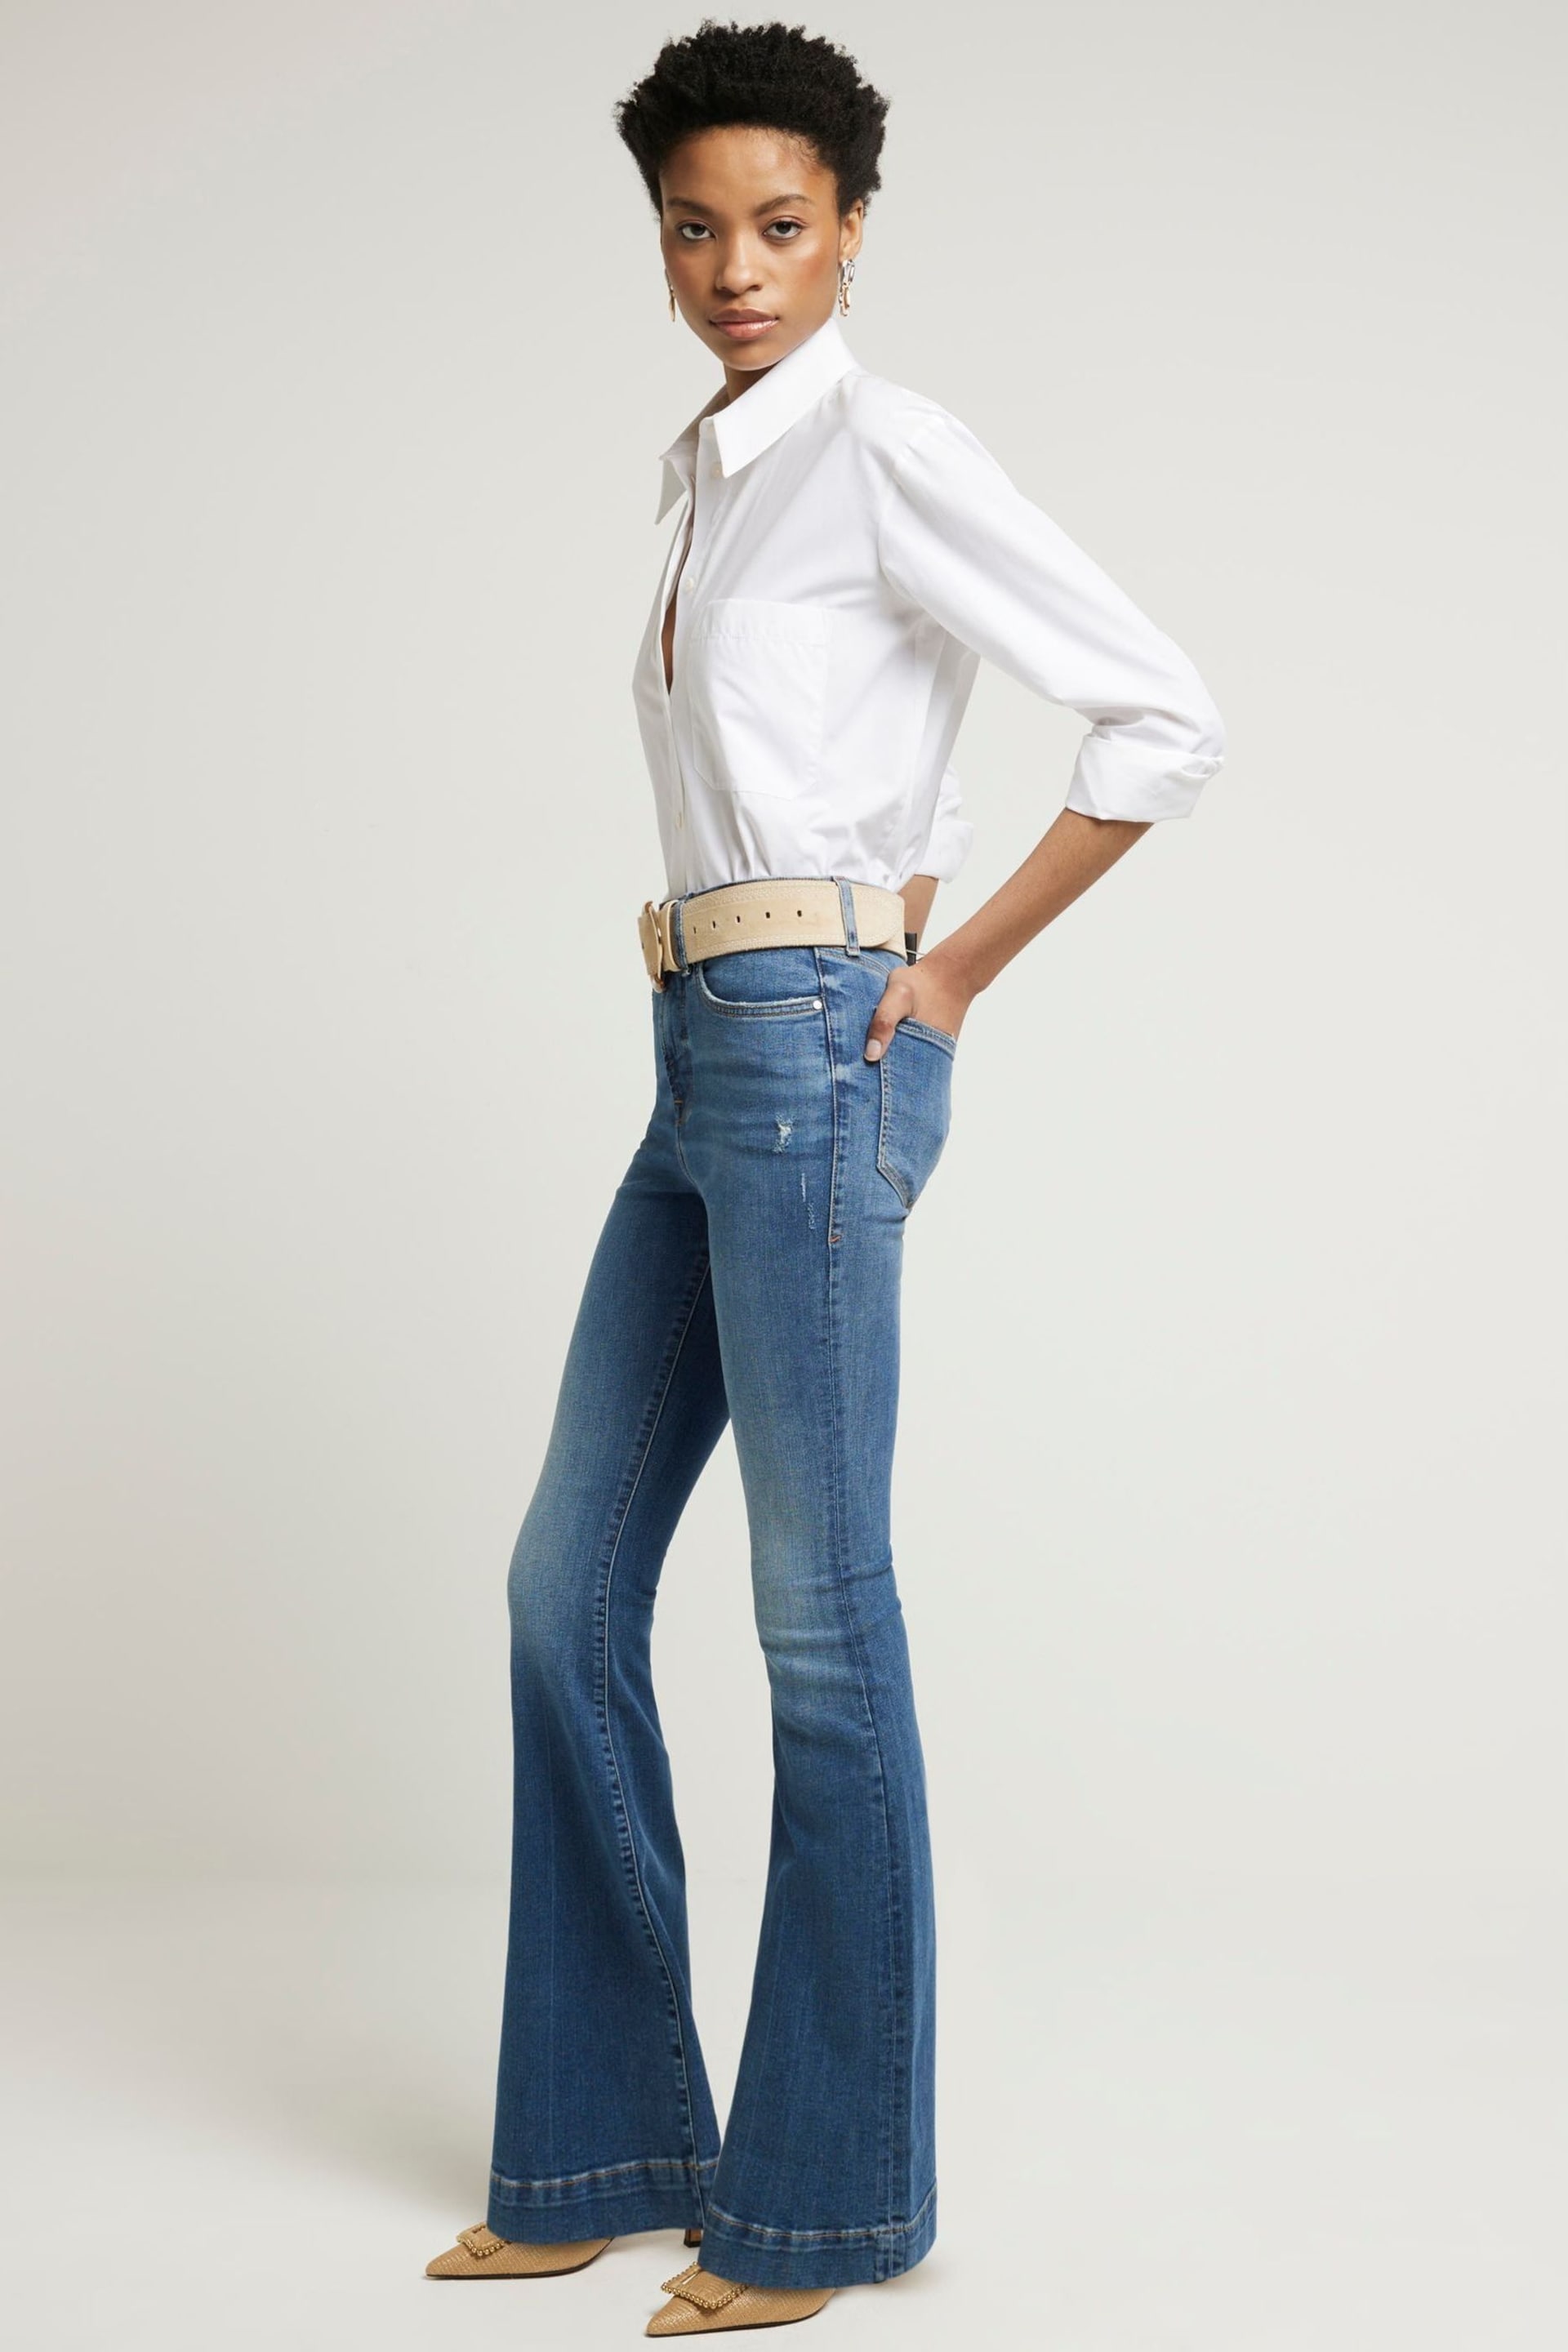 River Island Blue High Rise Tummy Hold Flare Jeans - Image 3 of 5